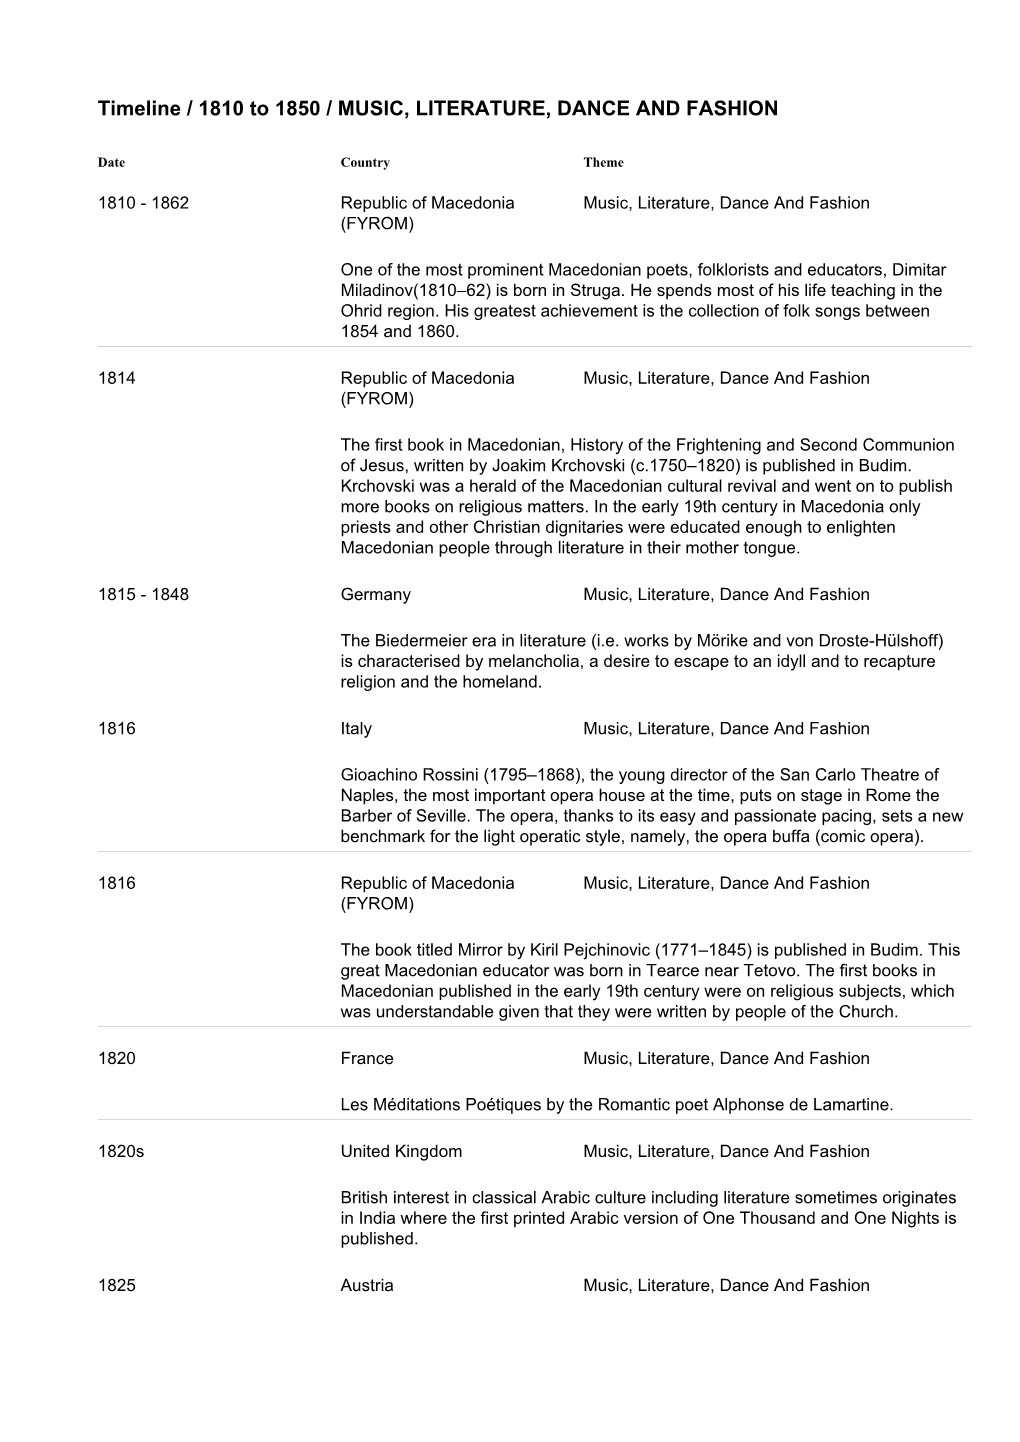 Timeline / 1810 to 1850 / MUSIC, LITERATURE, DANCE and FASHION